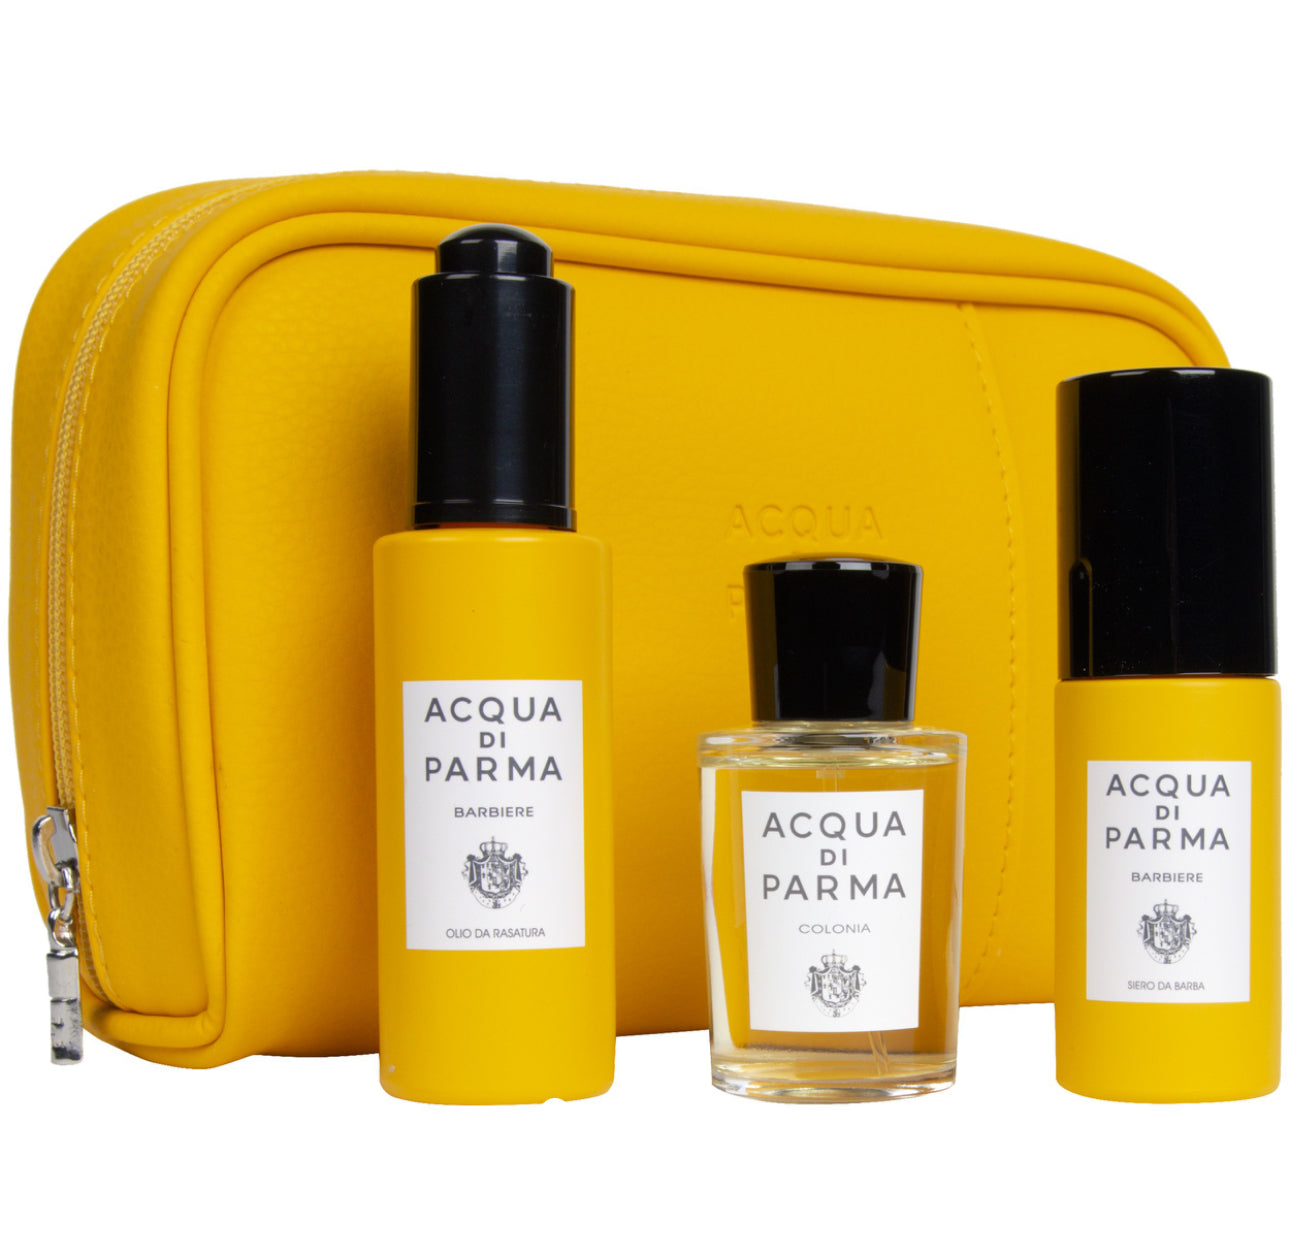 Acqua Di Parma BARBIERE COLLECTION
GROOMING KIT